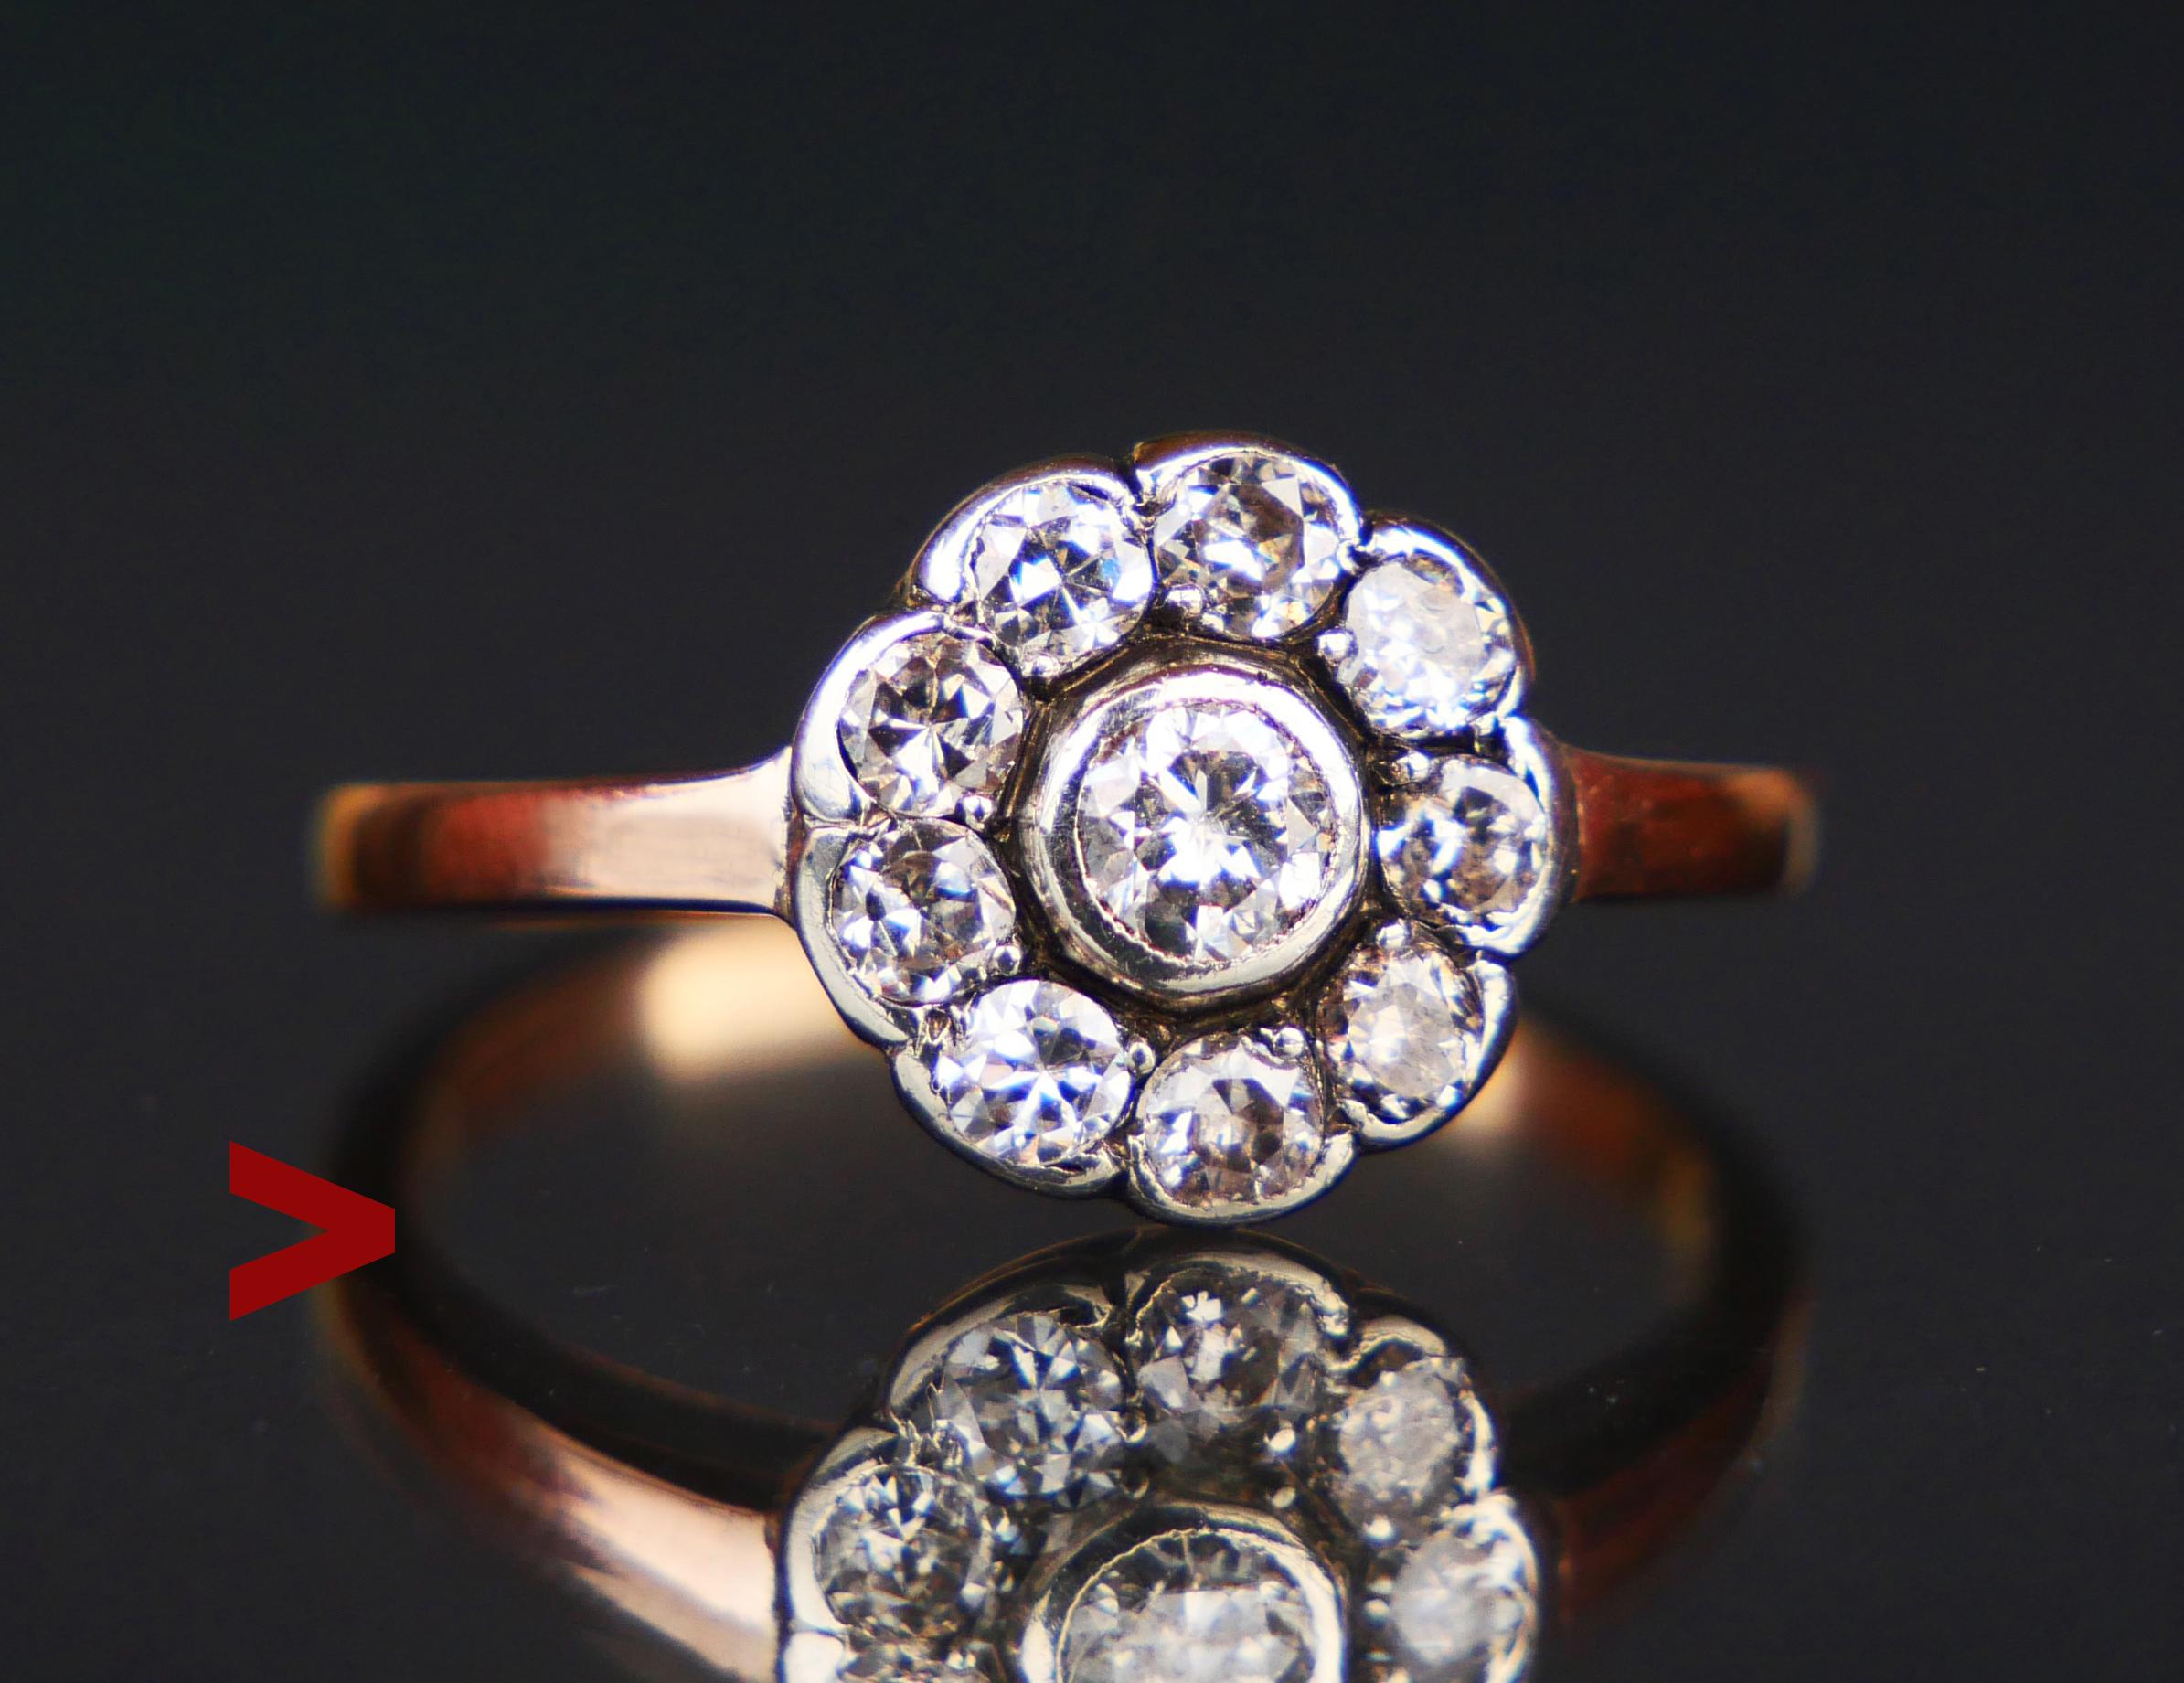 Antique Halo Ring with Diamonds, ca 1920s -1930s, likely German or Danish.  No hallmarks, band tested solid 14K Rose Gold.

Crown with top in White Gold or Silver holding 11 old diamond cut Diamonds.The larger Diamond in the center Ø 3.5 mm x 1.95